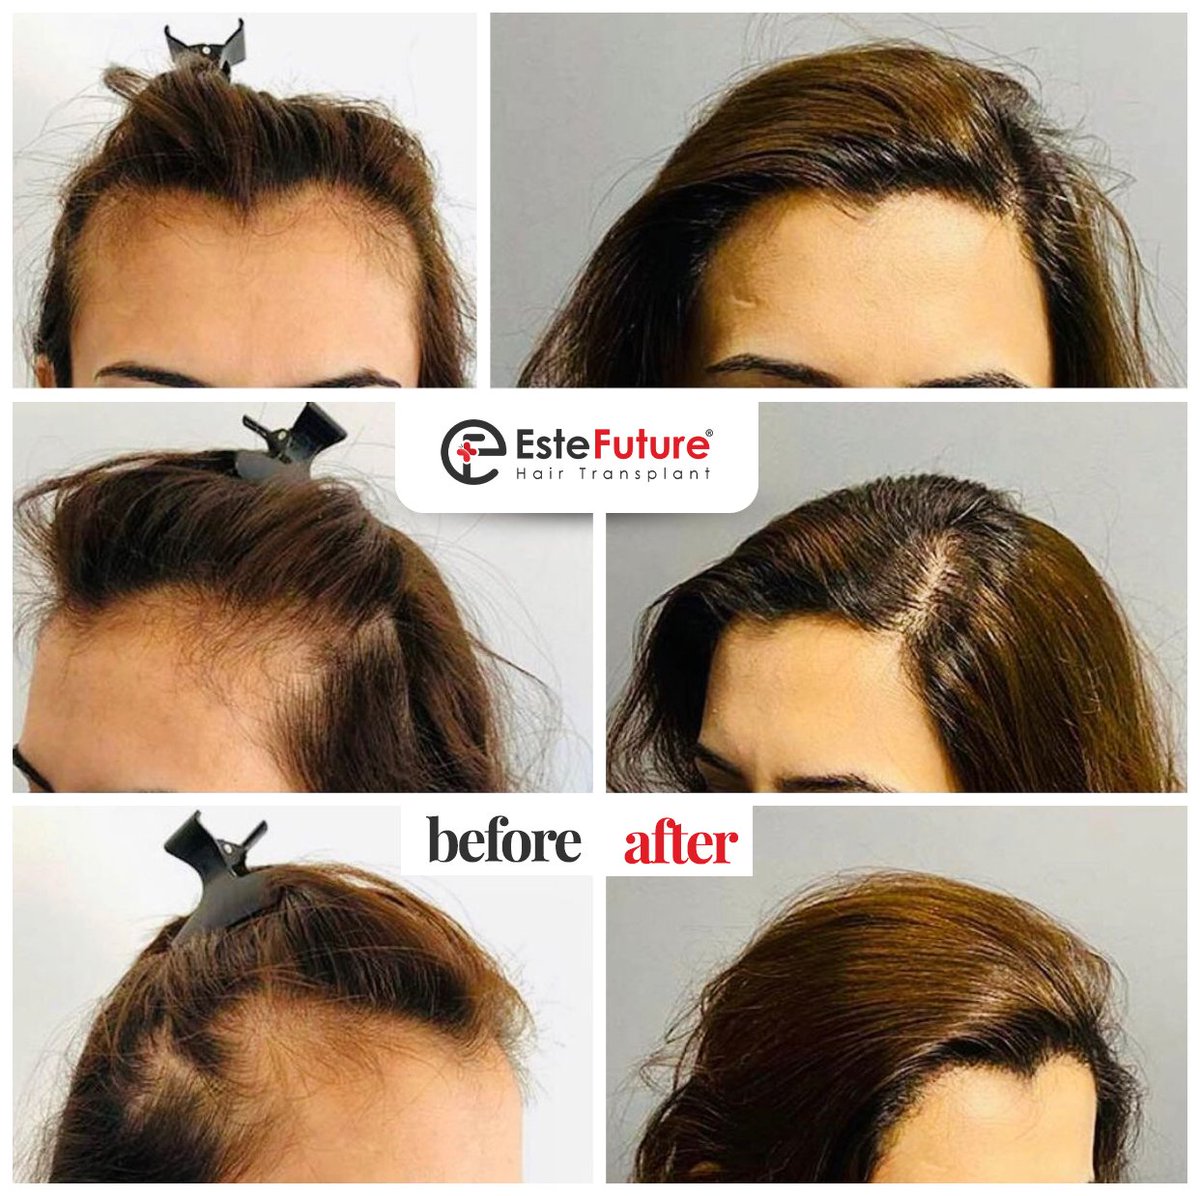 Restore the strength in your hair! We are here for an effective solution against hair loss. 💇‍♀️ #HairPlant #StrongHair #estefuture #hairtransplant #beforeafter